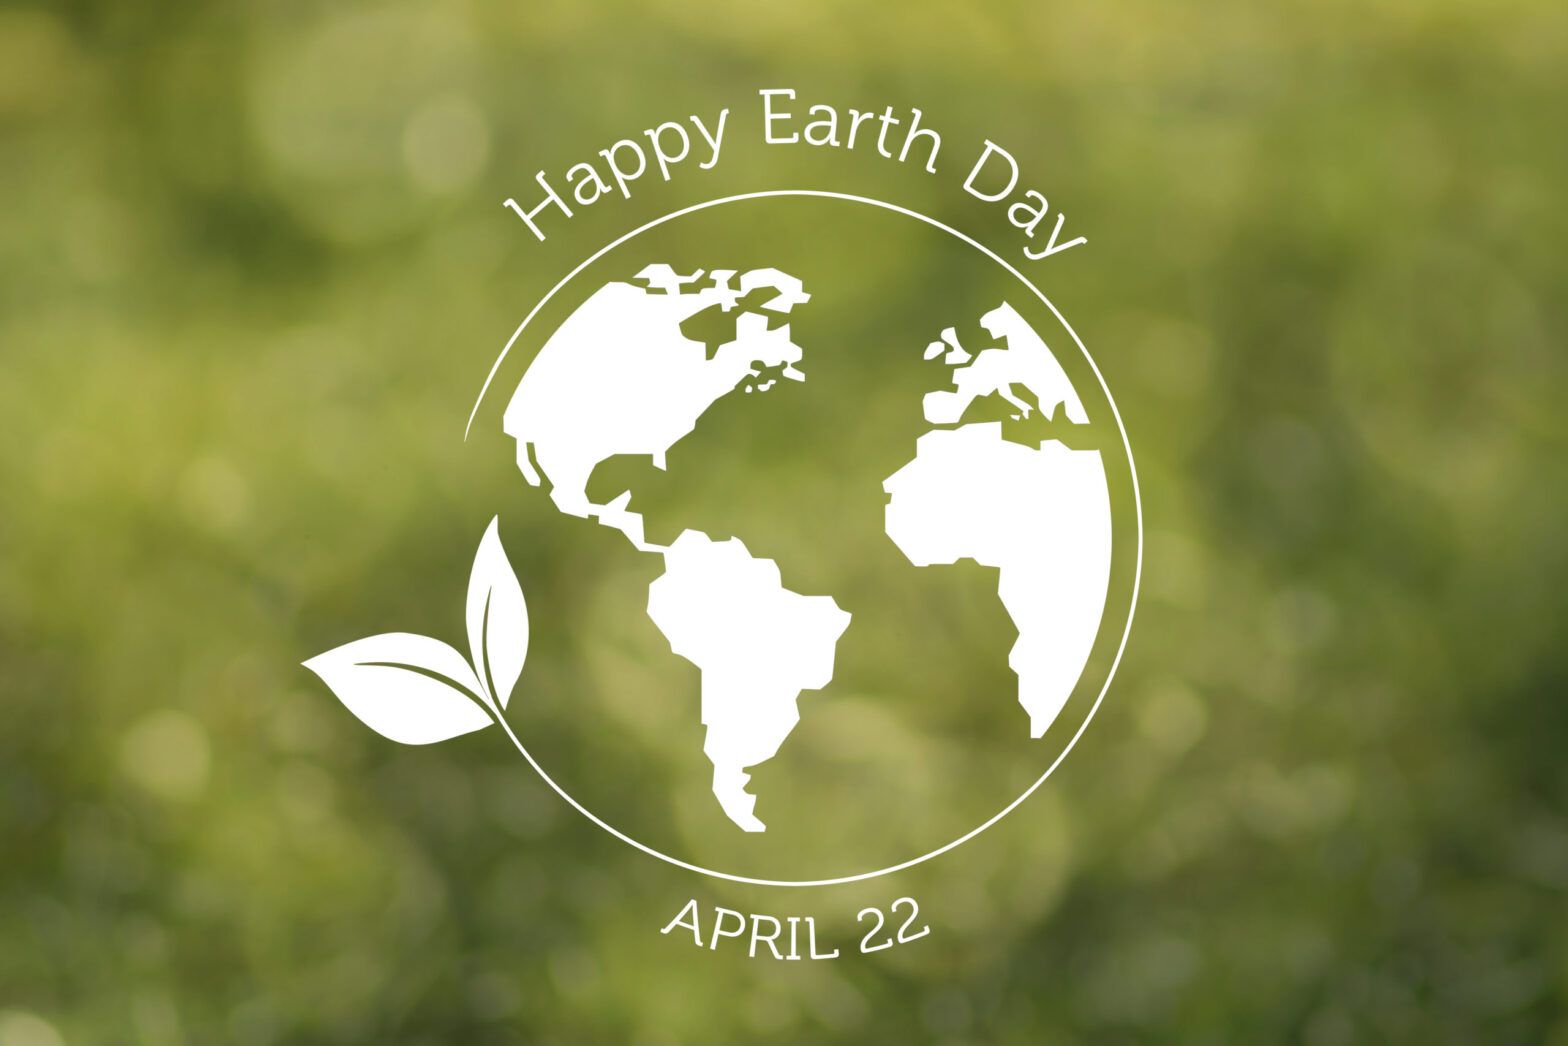 50 years of Earth Day: Key takeaways from the investment management sector